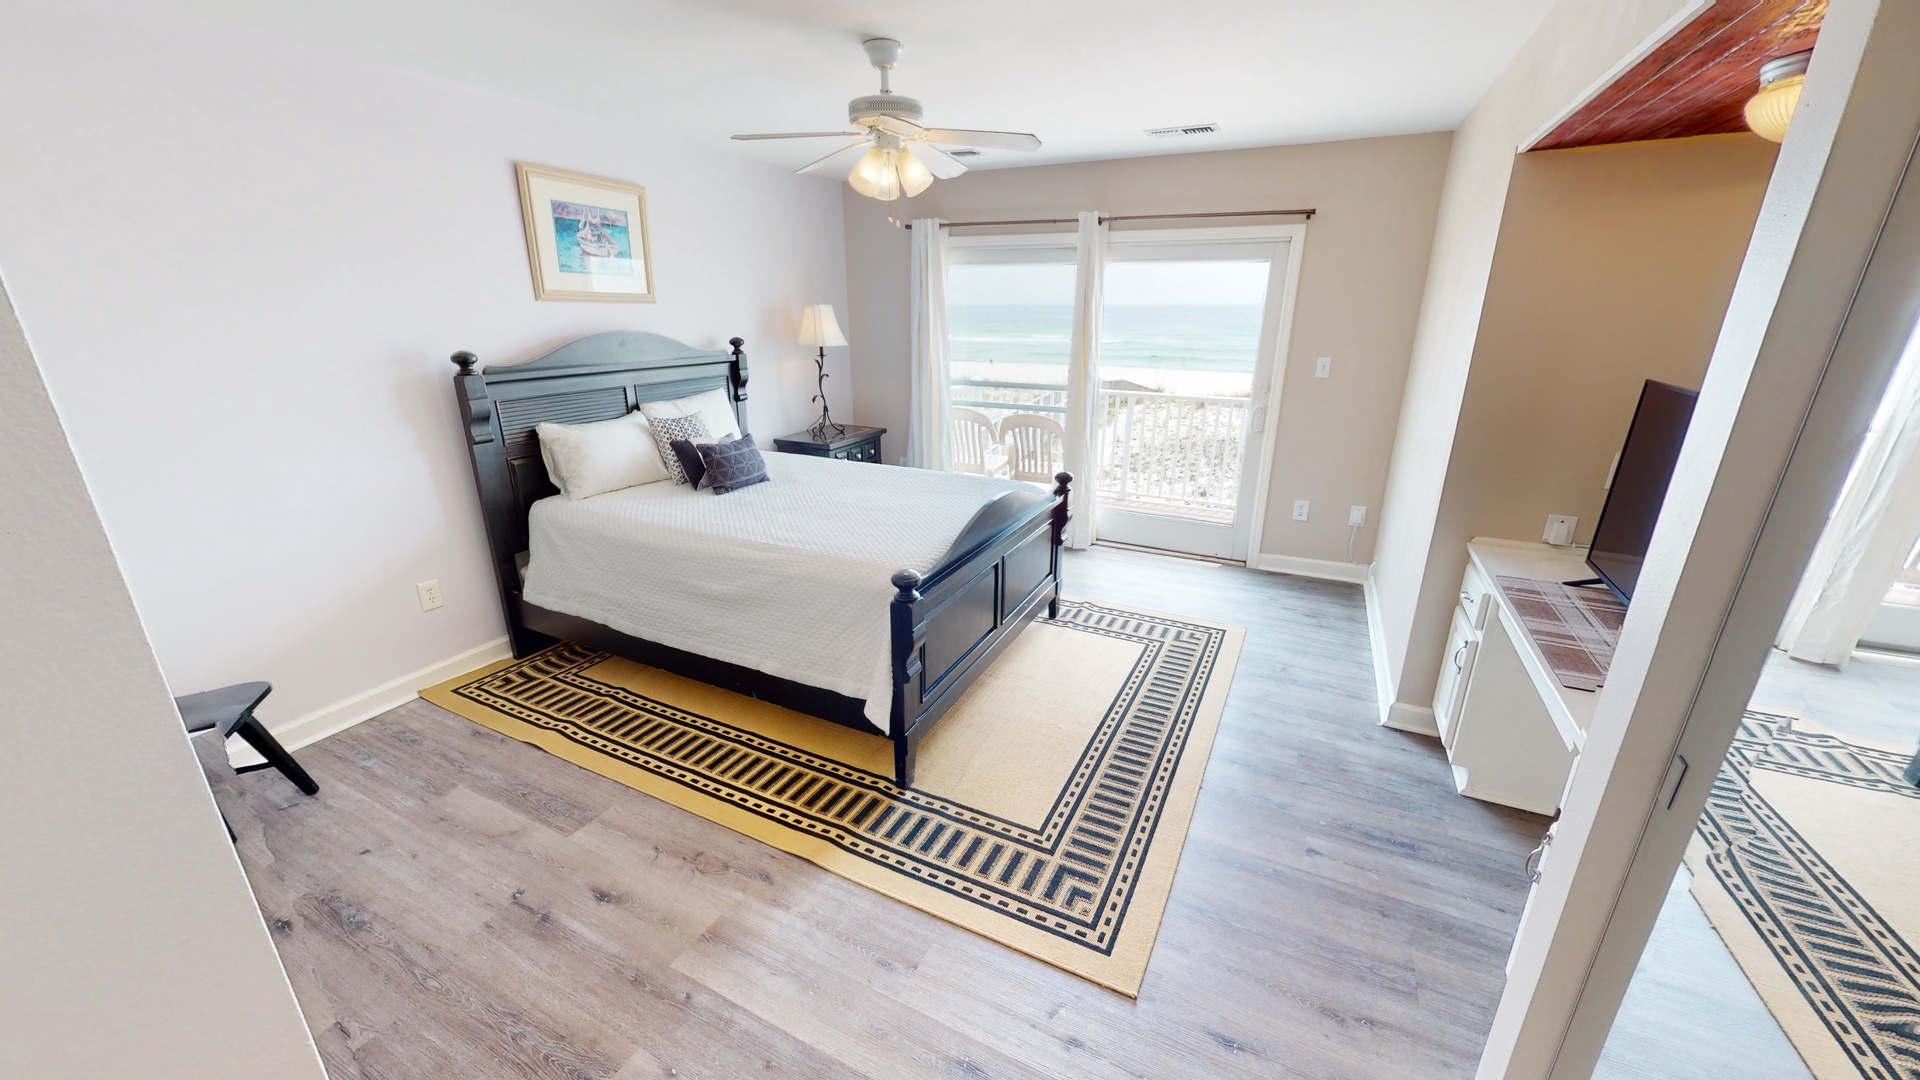 2nd floor- Bedroom 3 features a a Queen bed and Gulf views